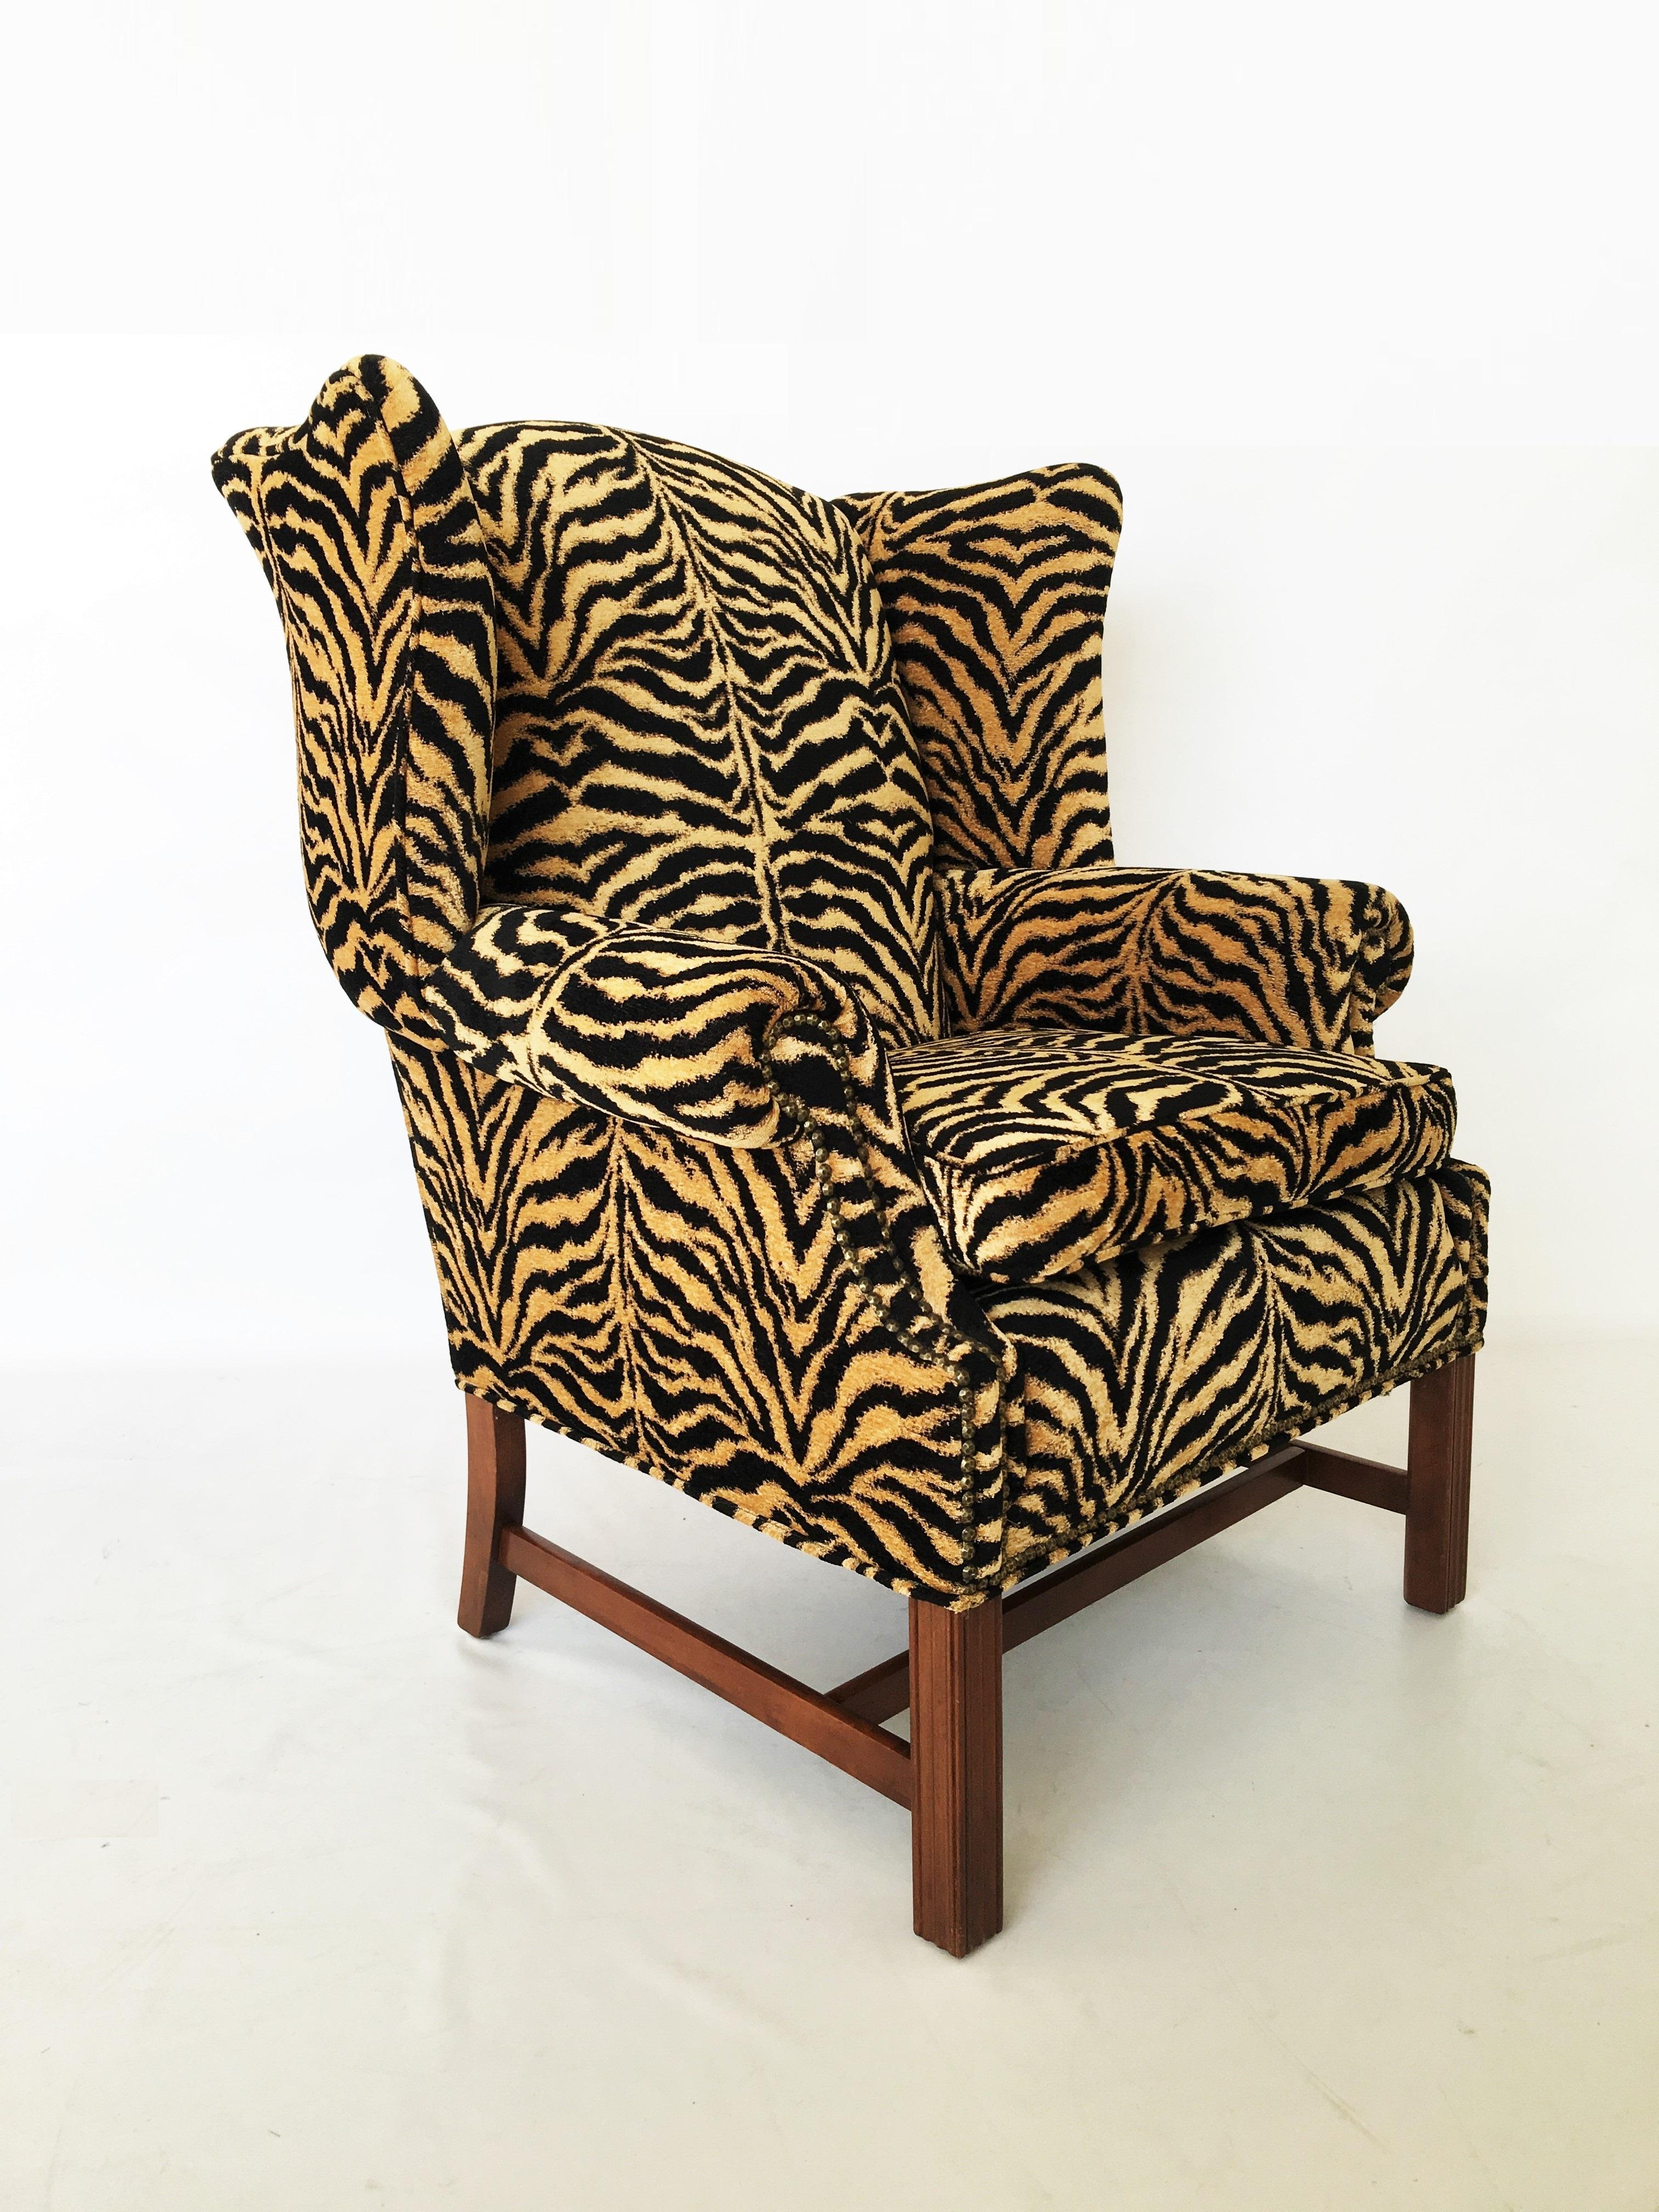 Upholstery Georgian Style Mahogany Wingback Armchair in Scalamandré Le Tigre